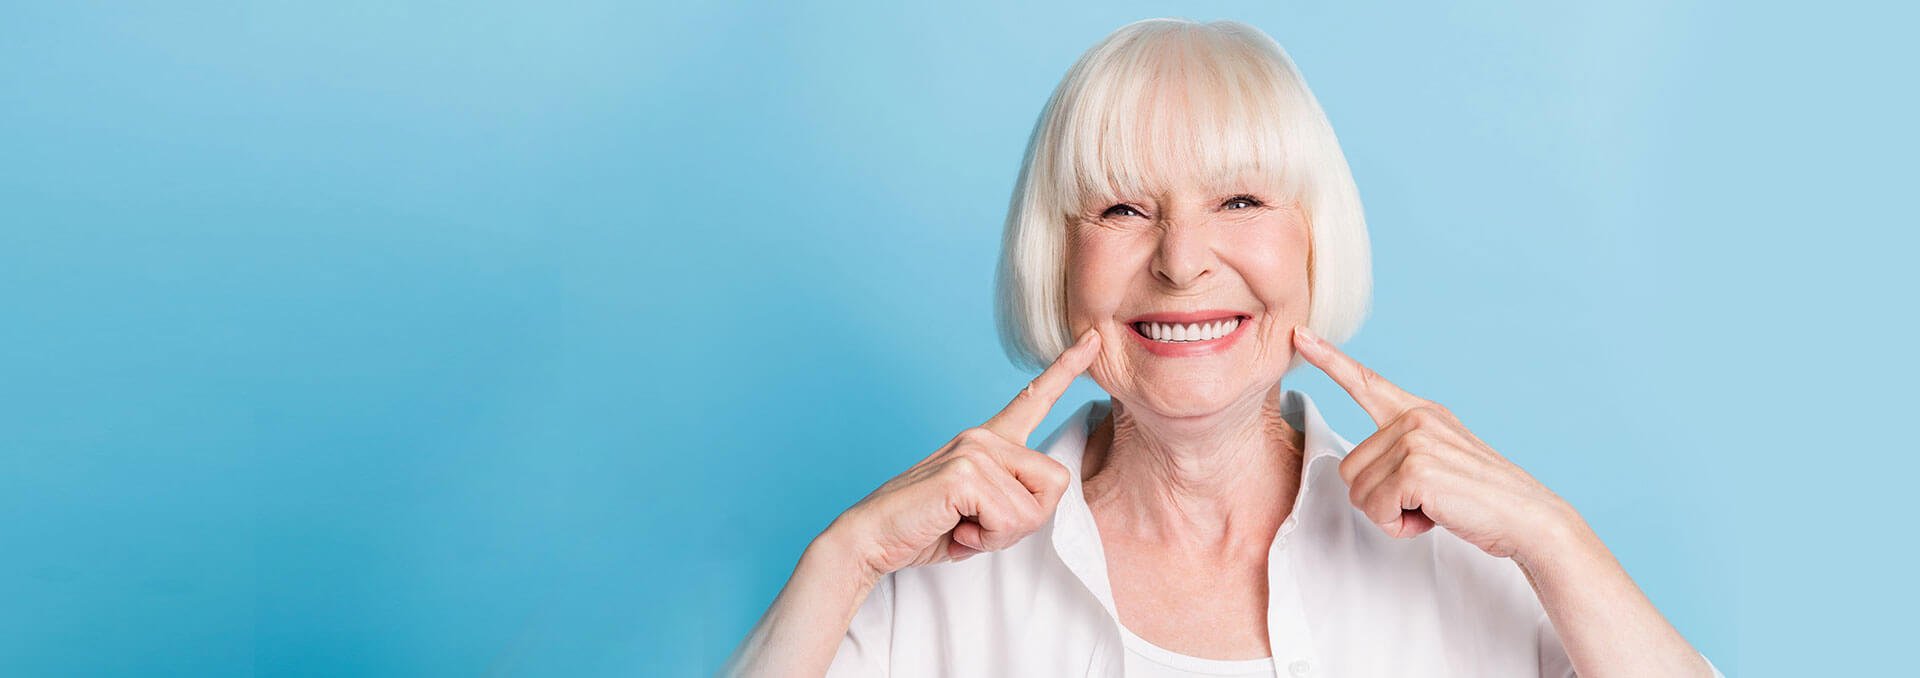 Dentures Natural Looking and Comfortable